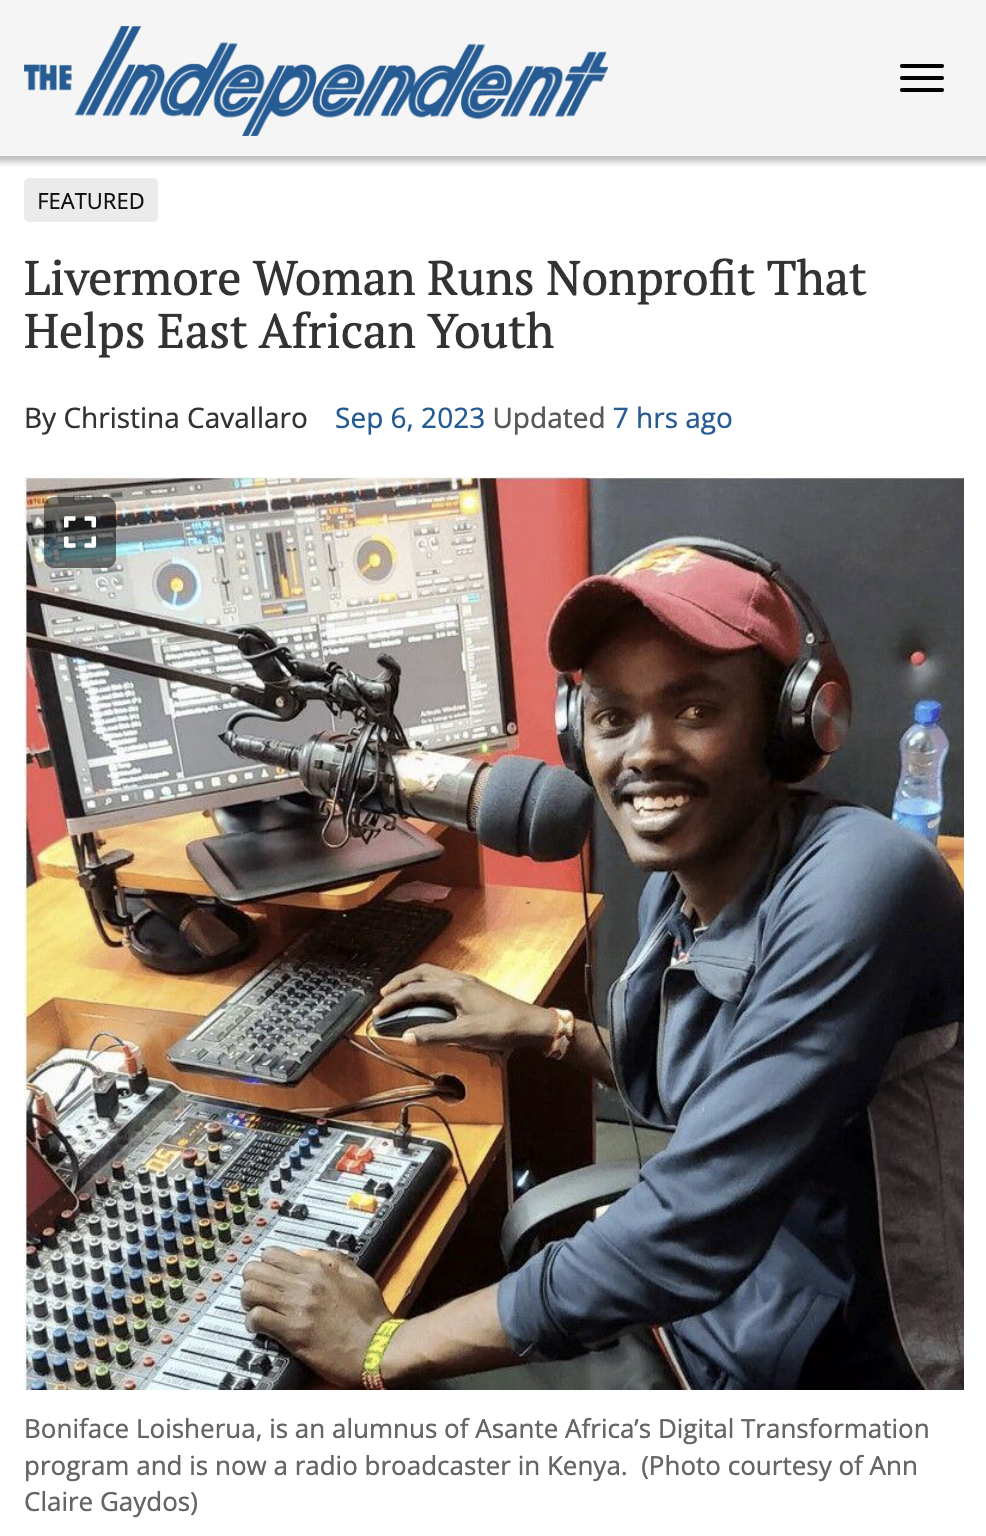 support and educates East Africa’s youth